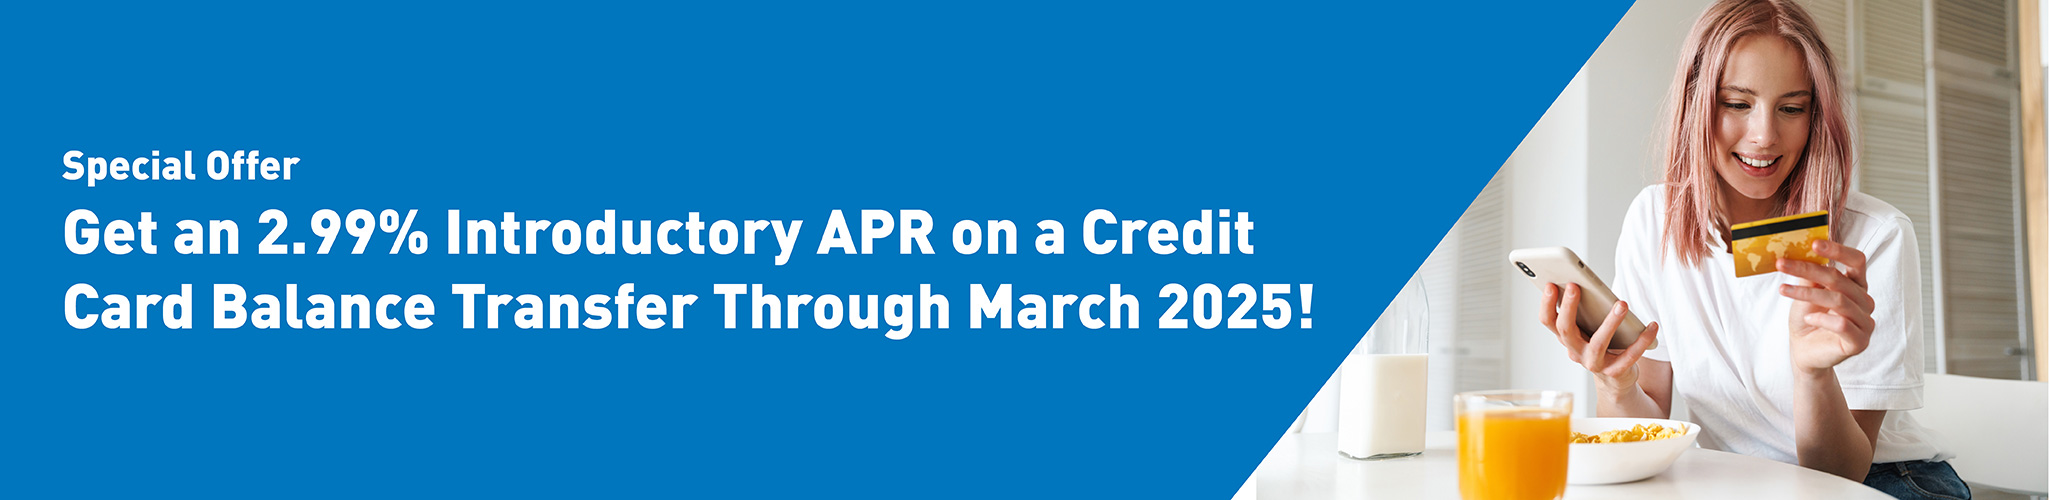 Special offer get a 2.99 percent introductory apr on a credit card balance transfer through march 2025